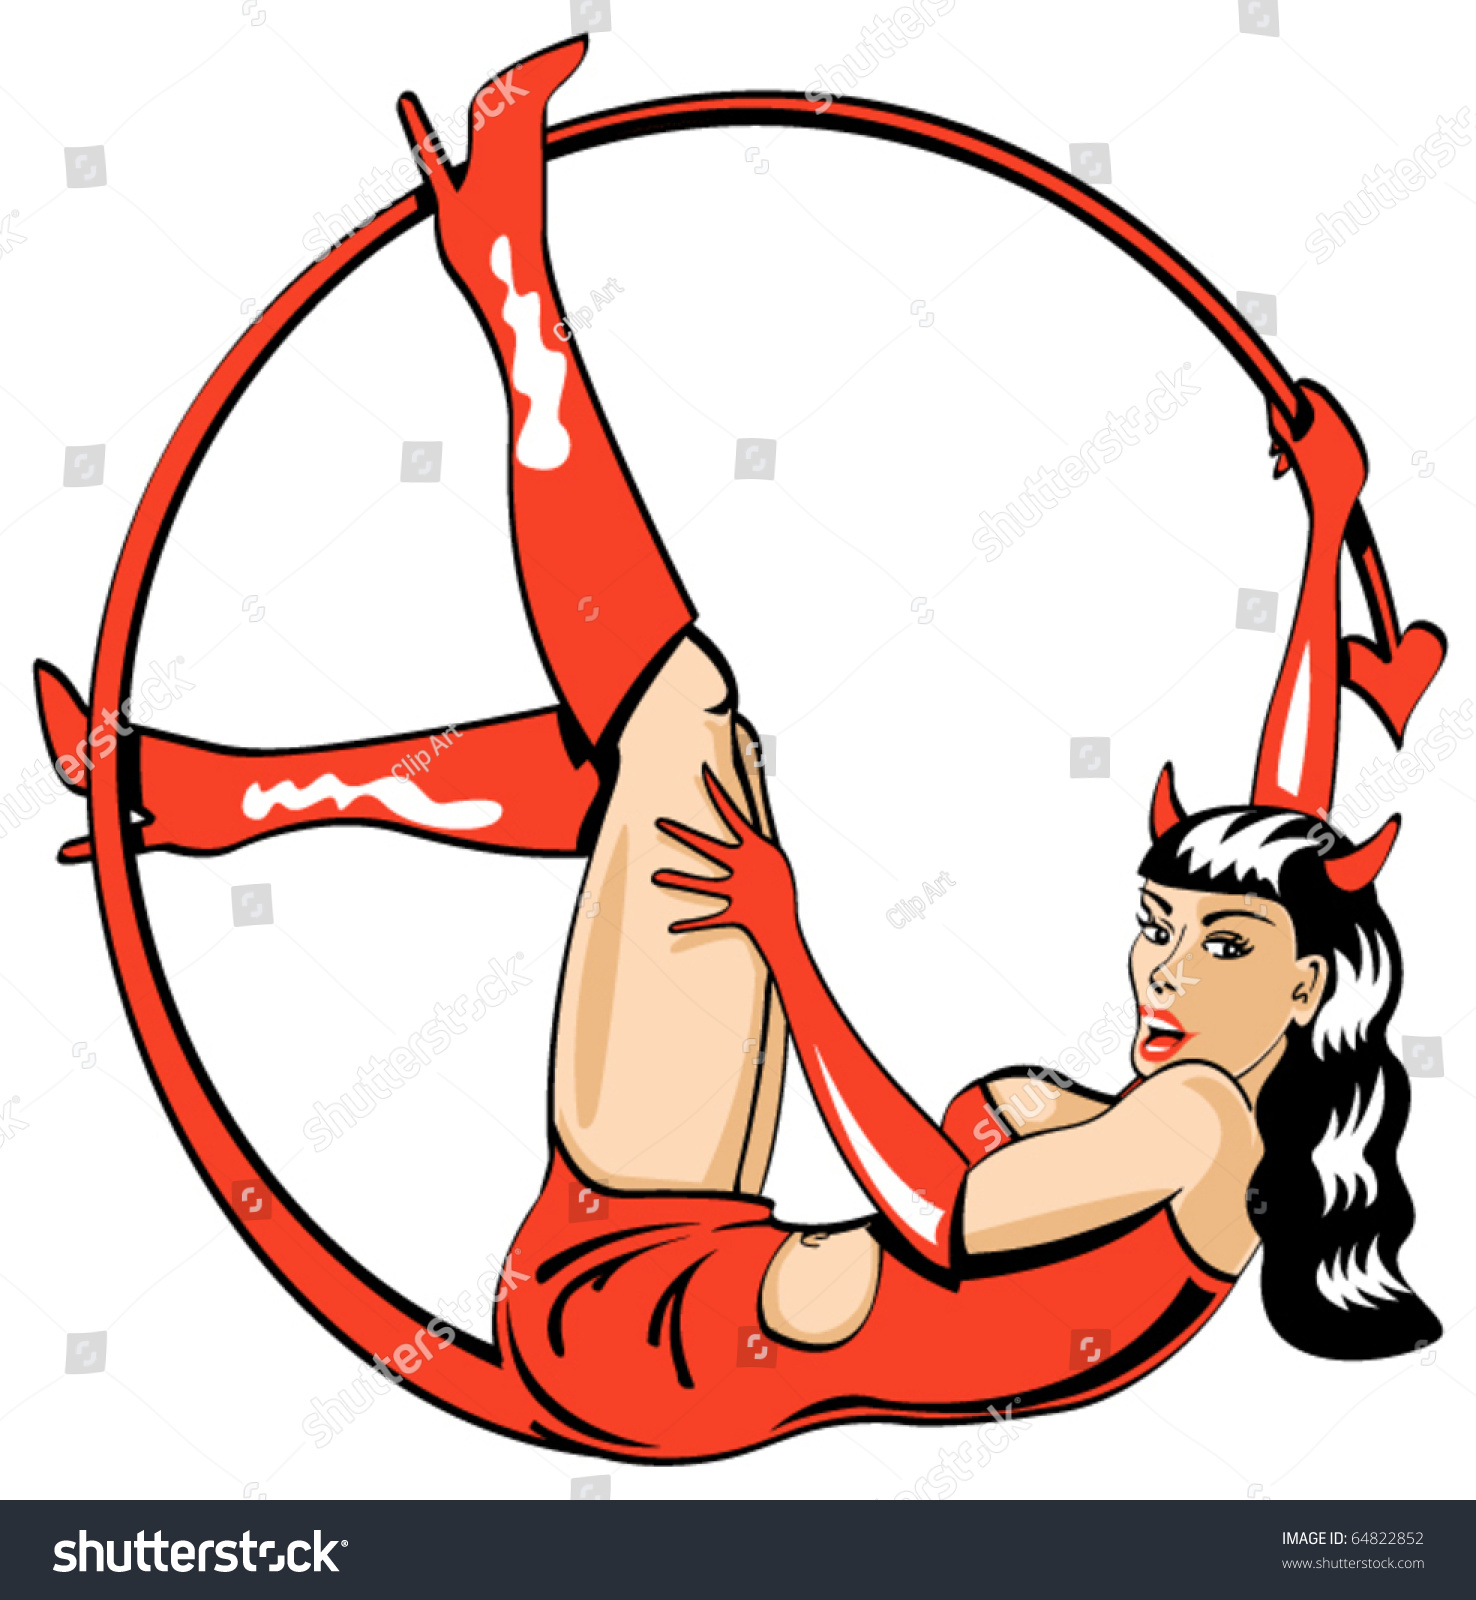 vintage pin up clipart - photo #49